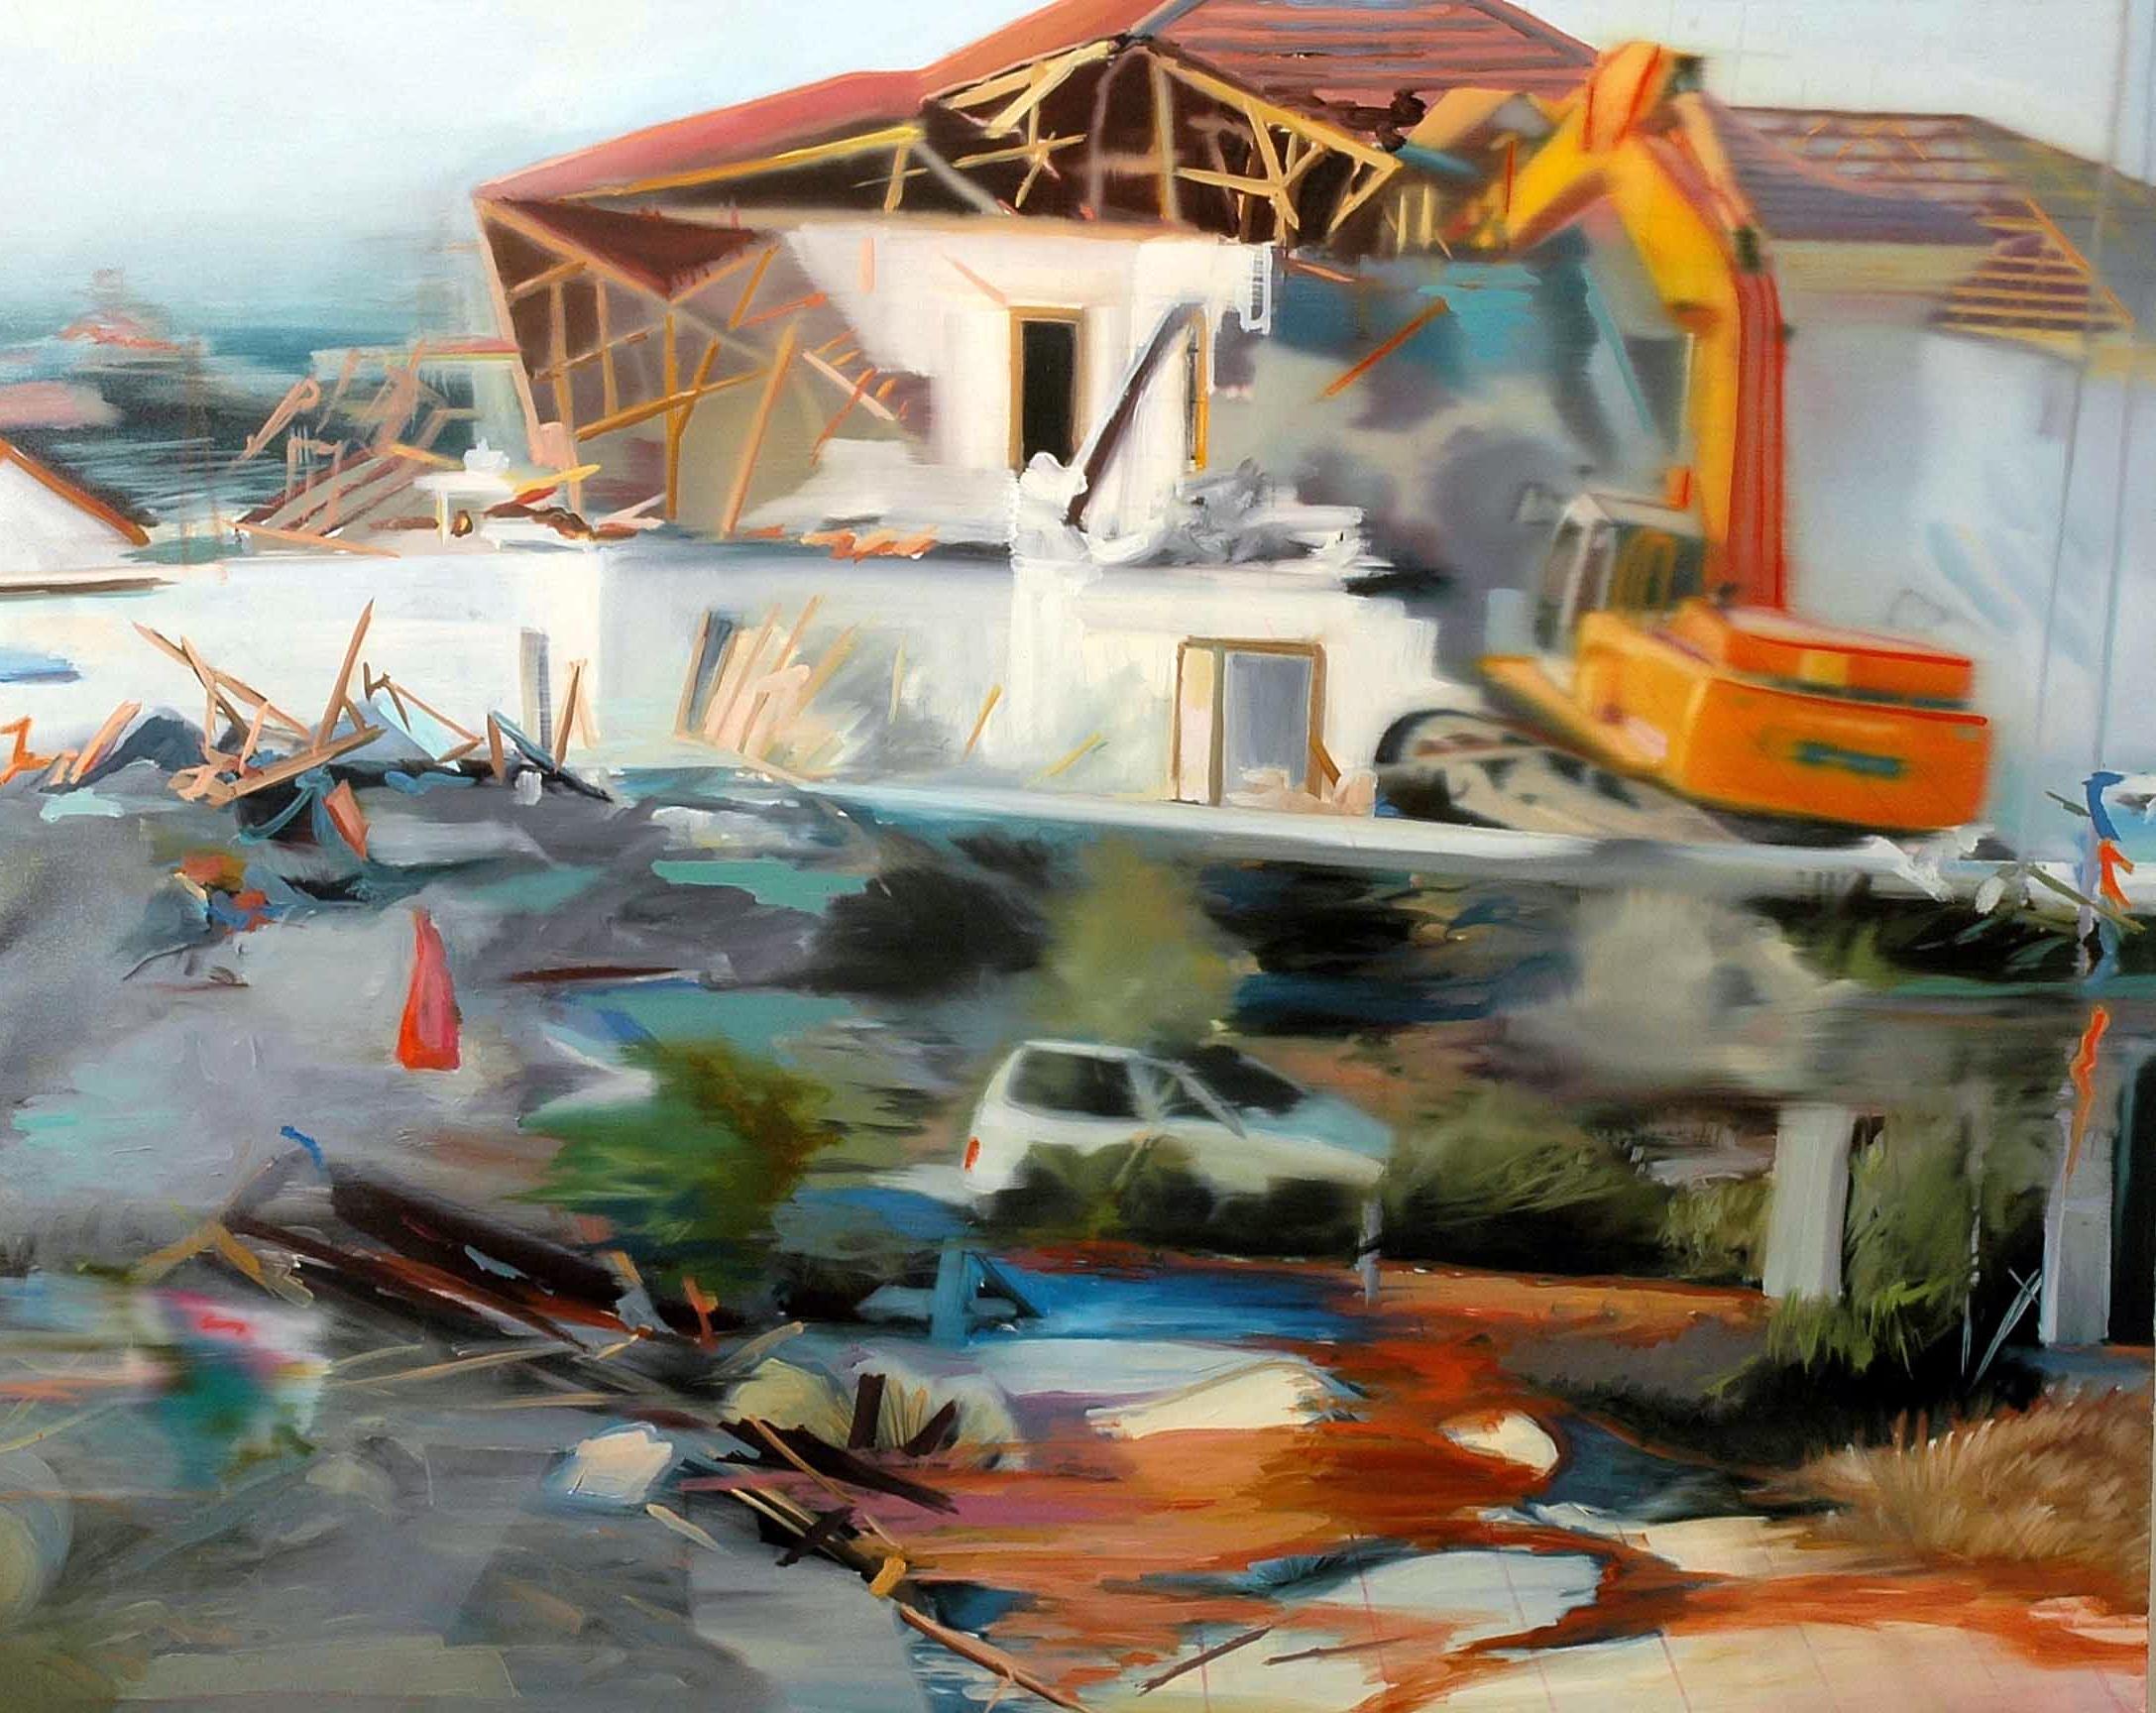   Gaza 3 , 2006, oil on canvas,&nbsp;120 x 150cm. Private collection,&nbsp;France 